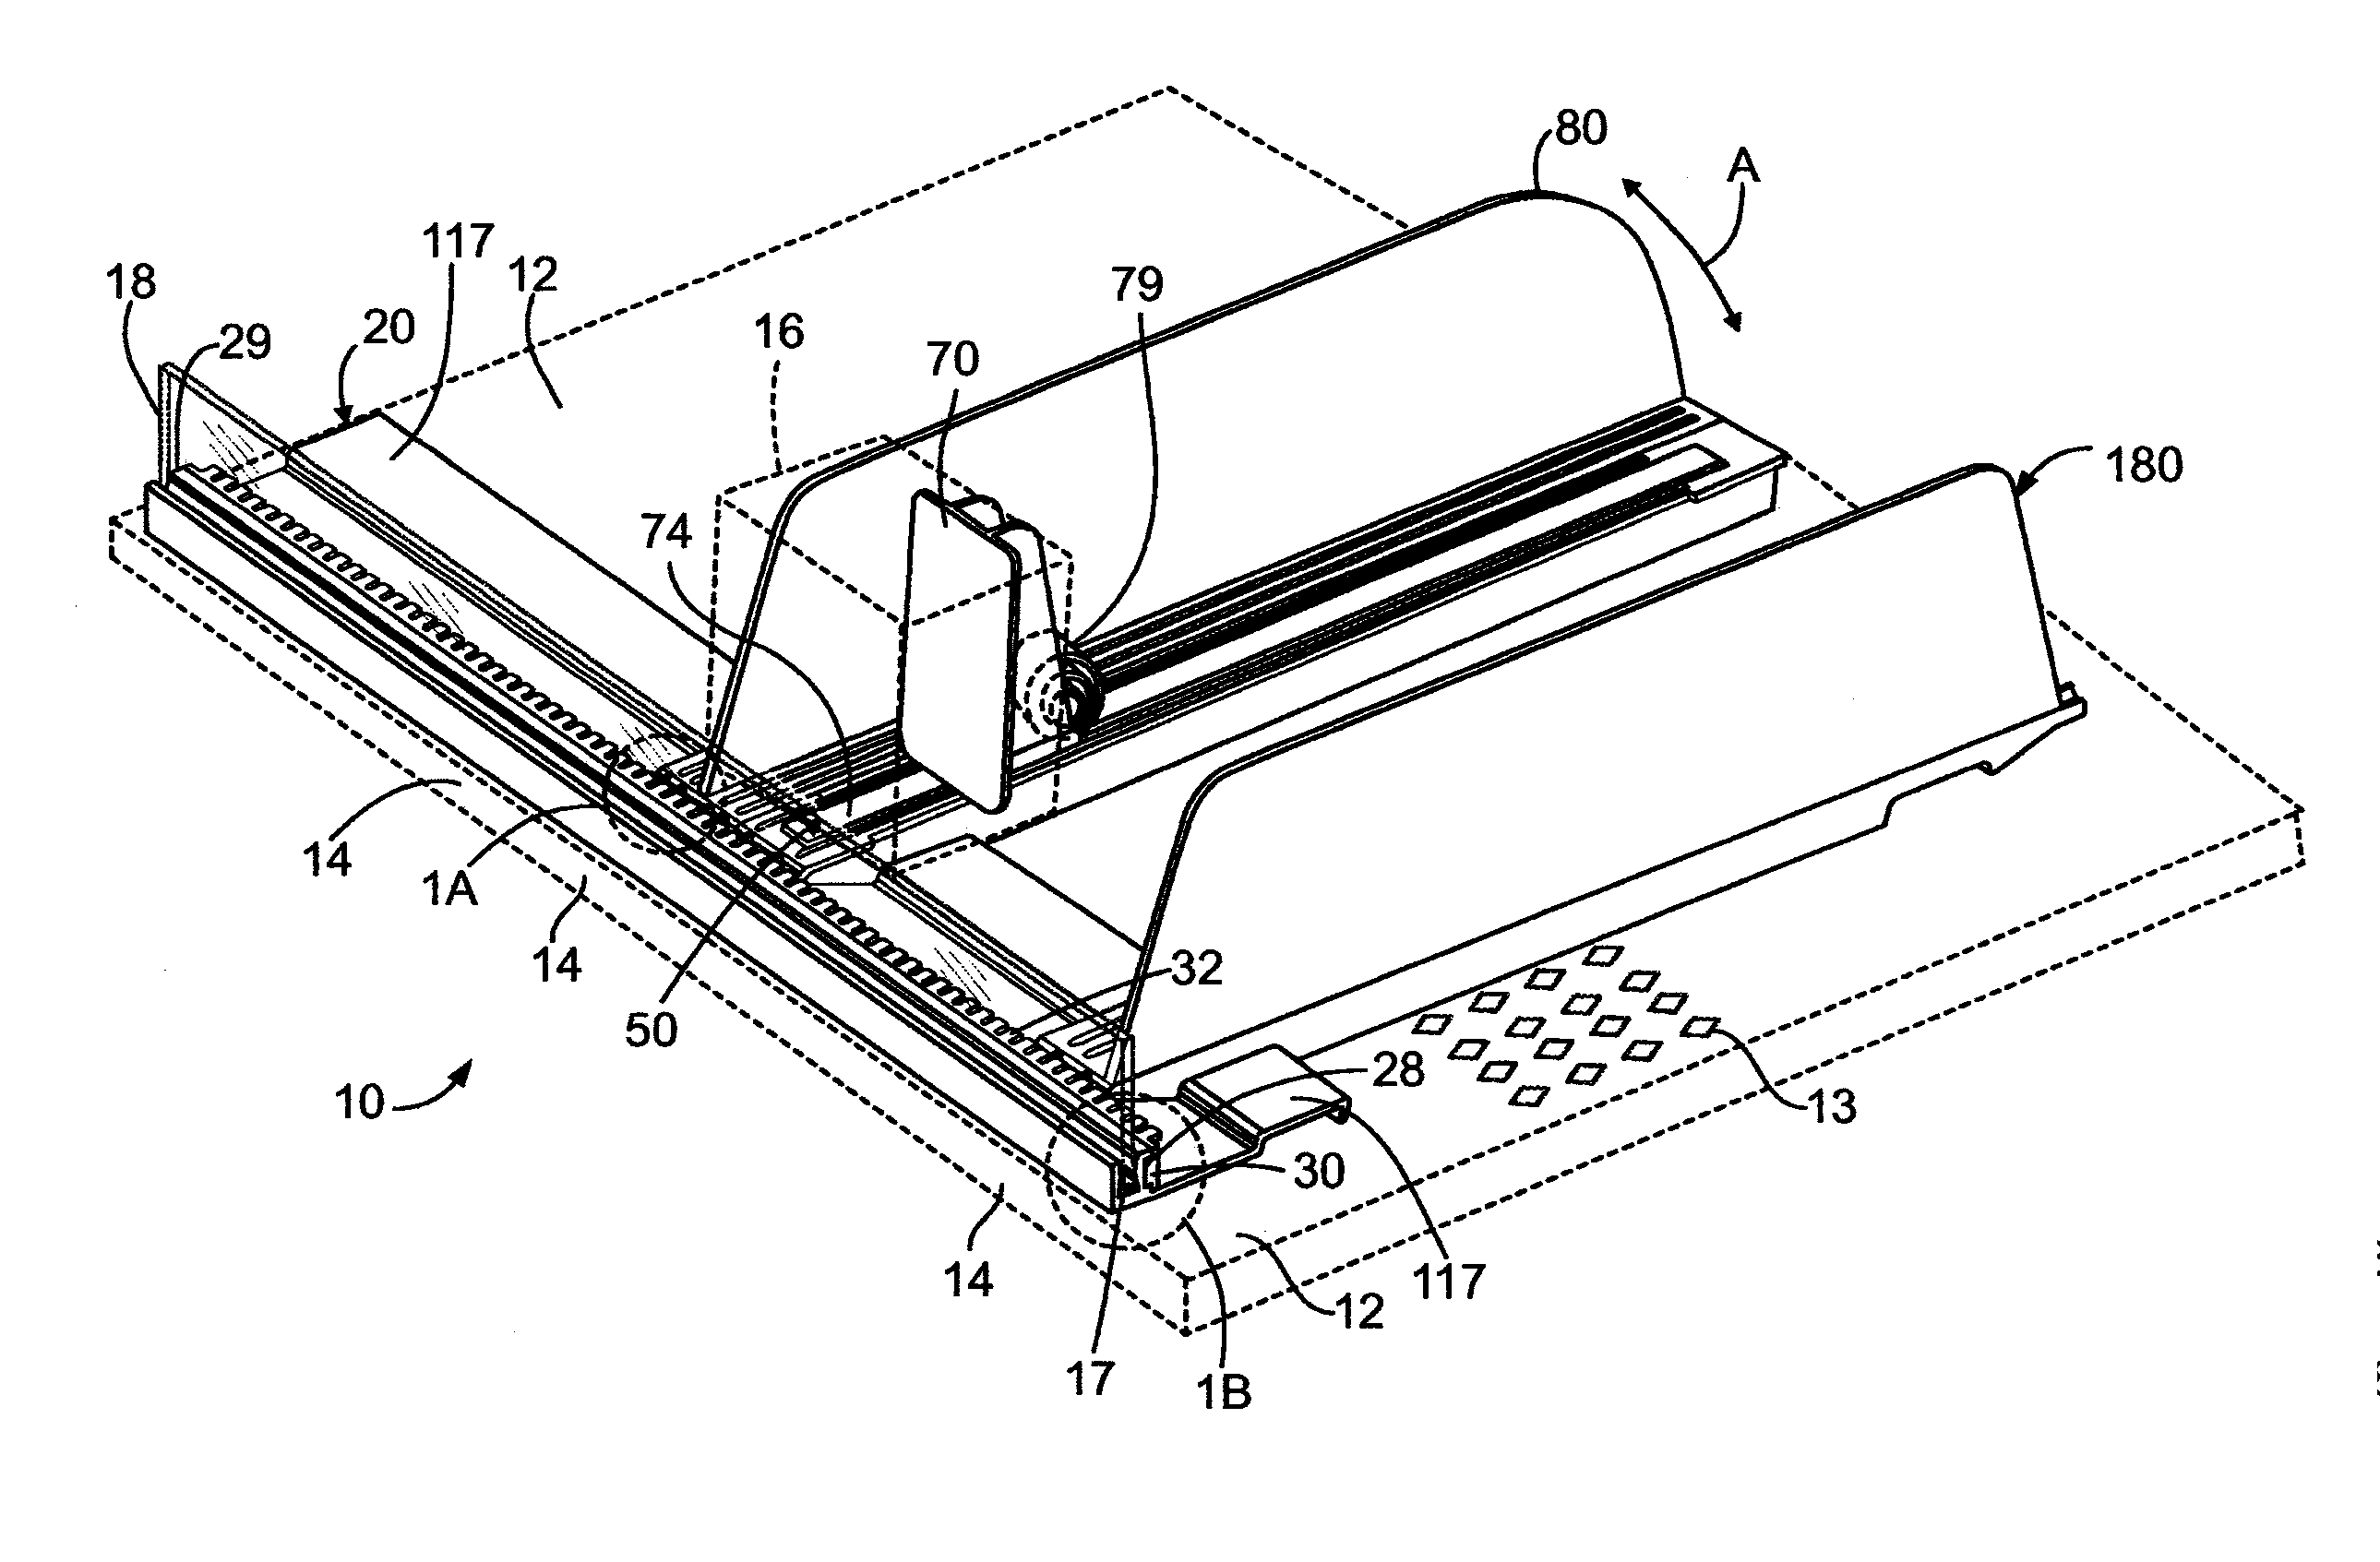 Merchandise display and pusher device